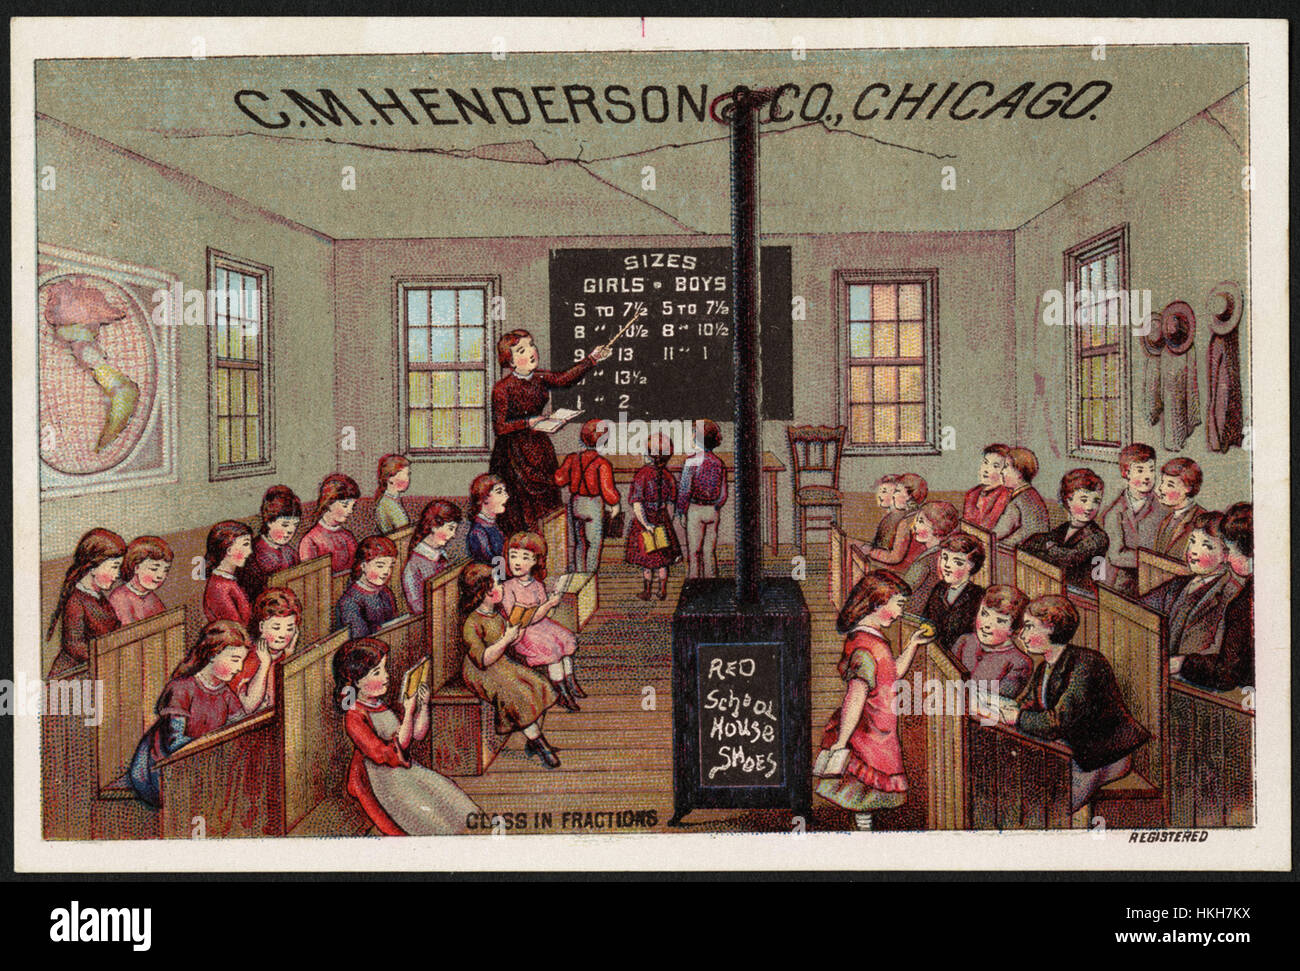 C. M. Henderson & Co., Chicago. Red School House shoes - class in fractions Stock Photo